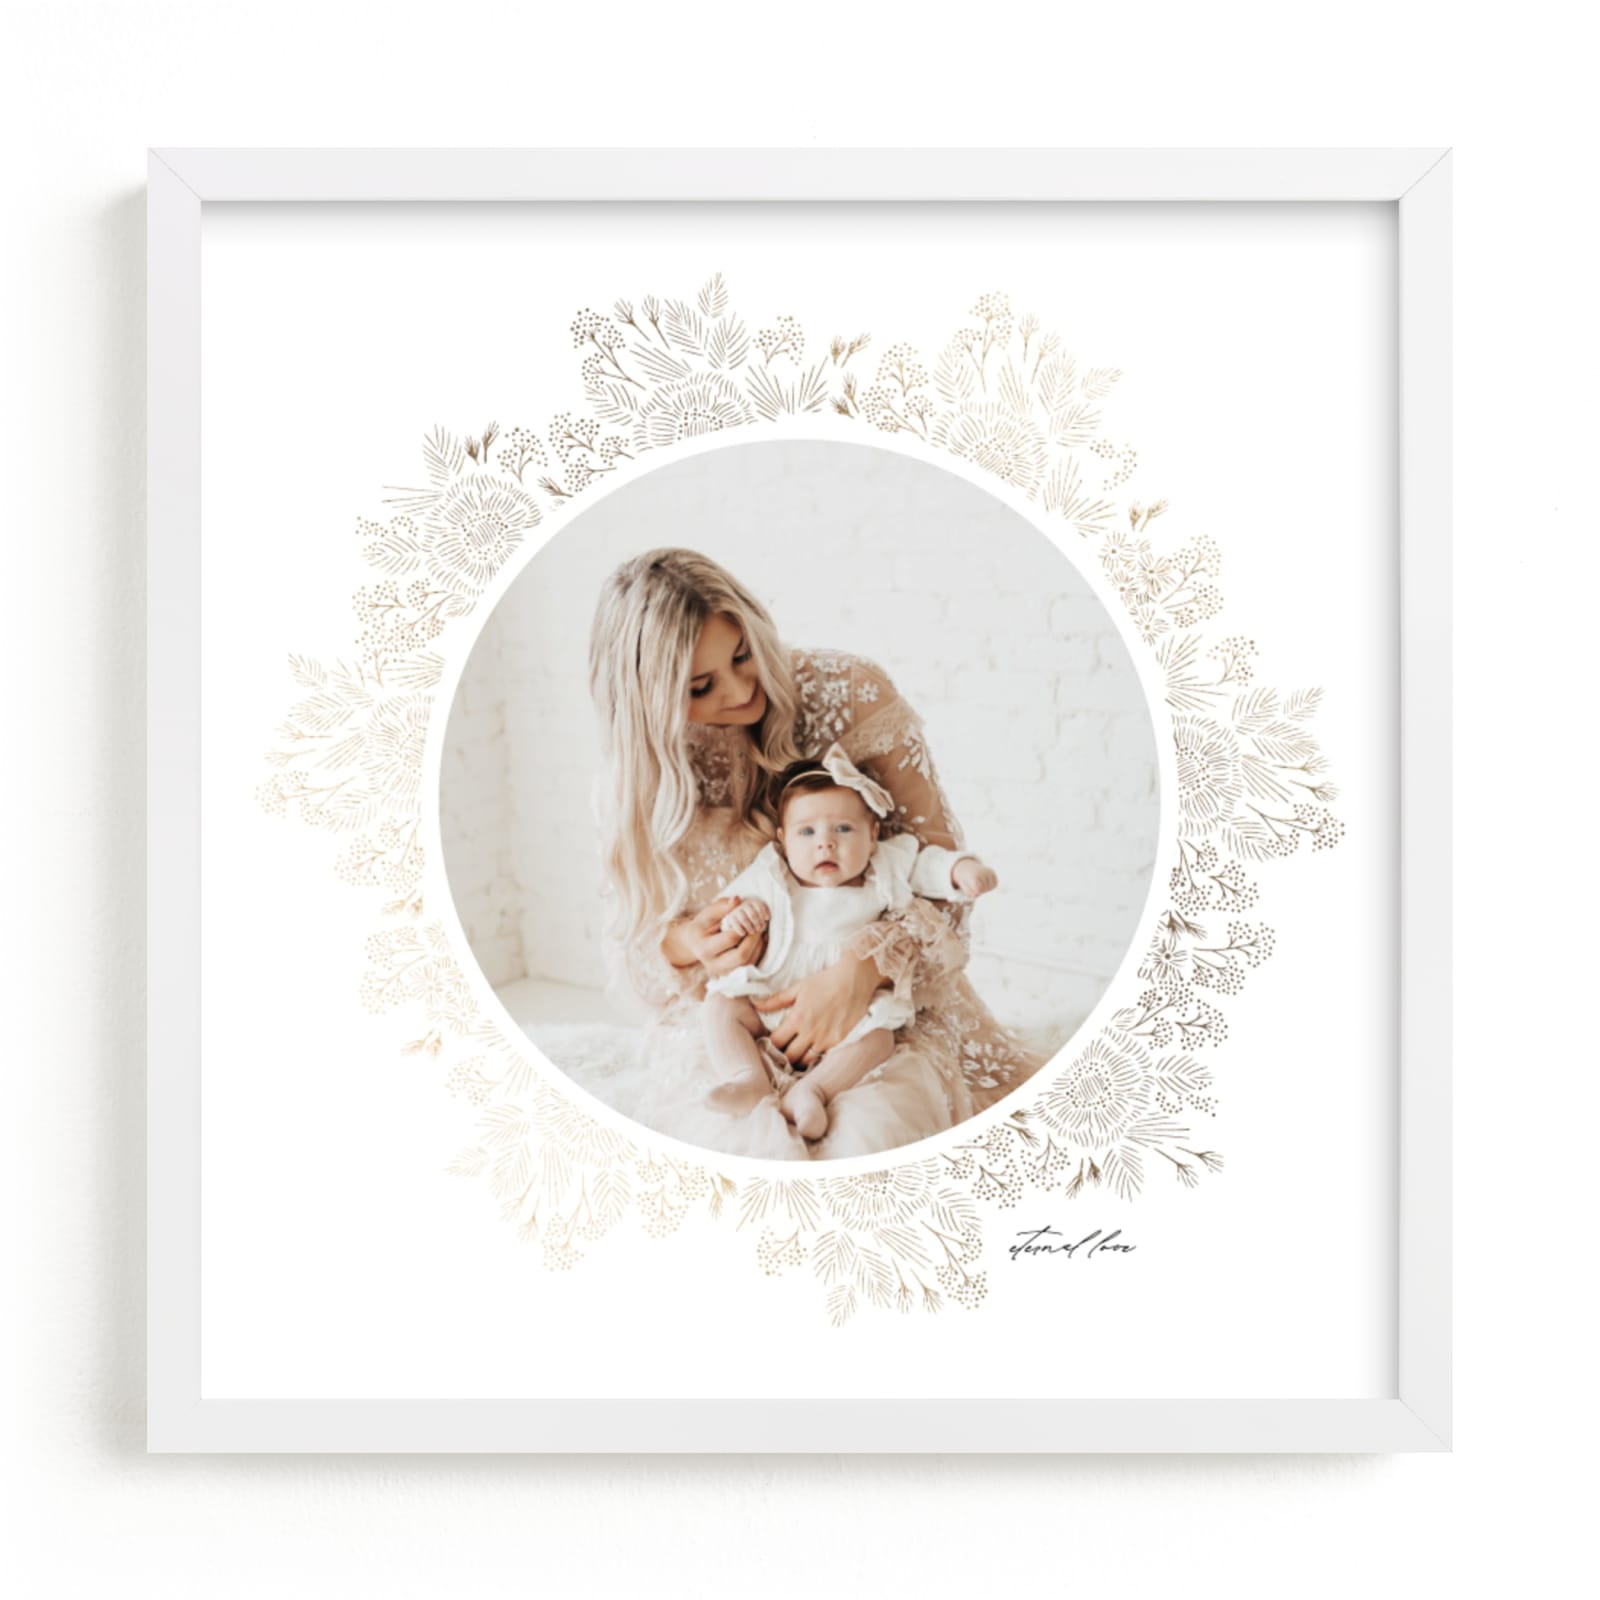 This is a gold, white foil stamped photo art by Tamara Hilje called Gilded Blooms.